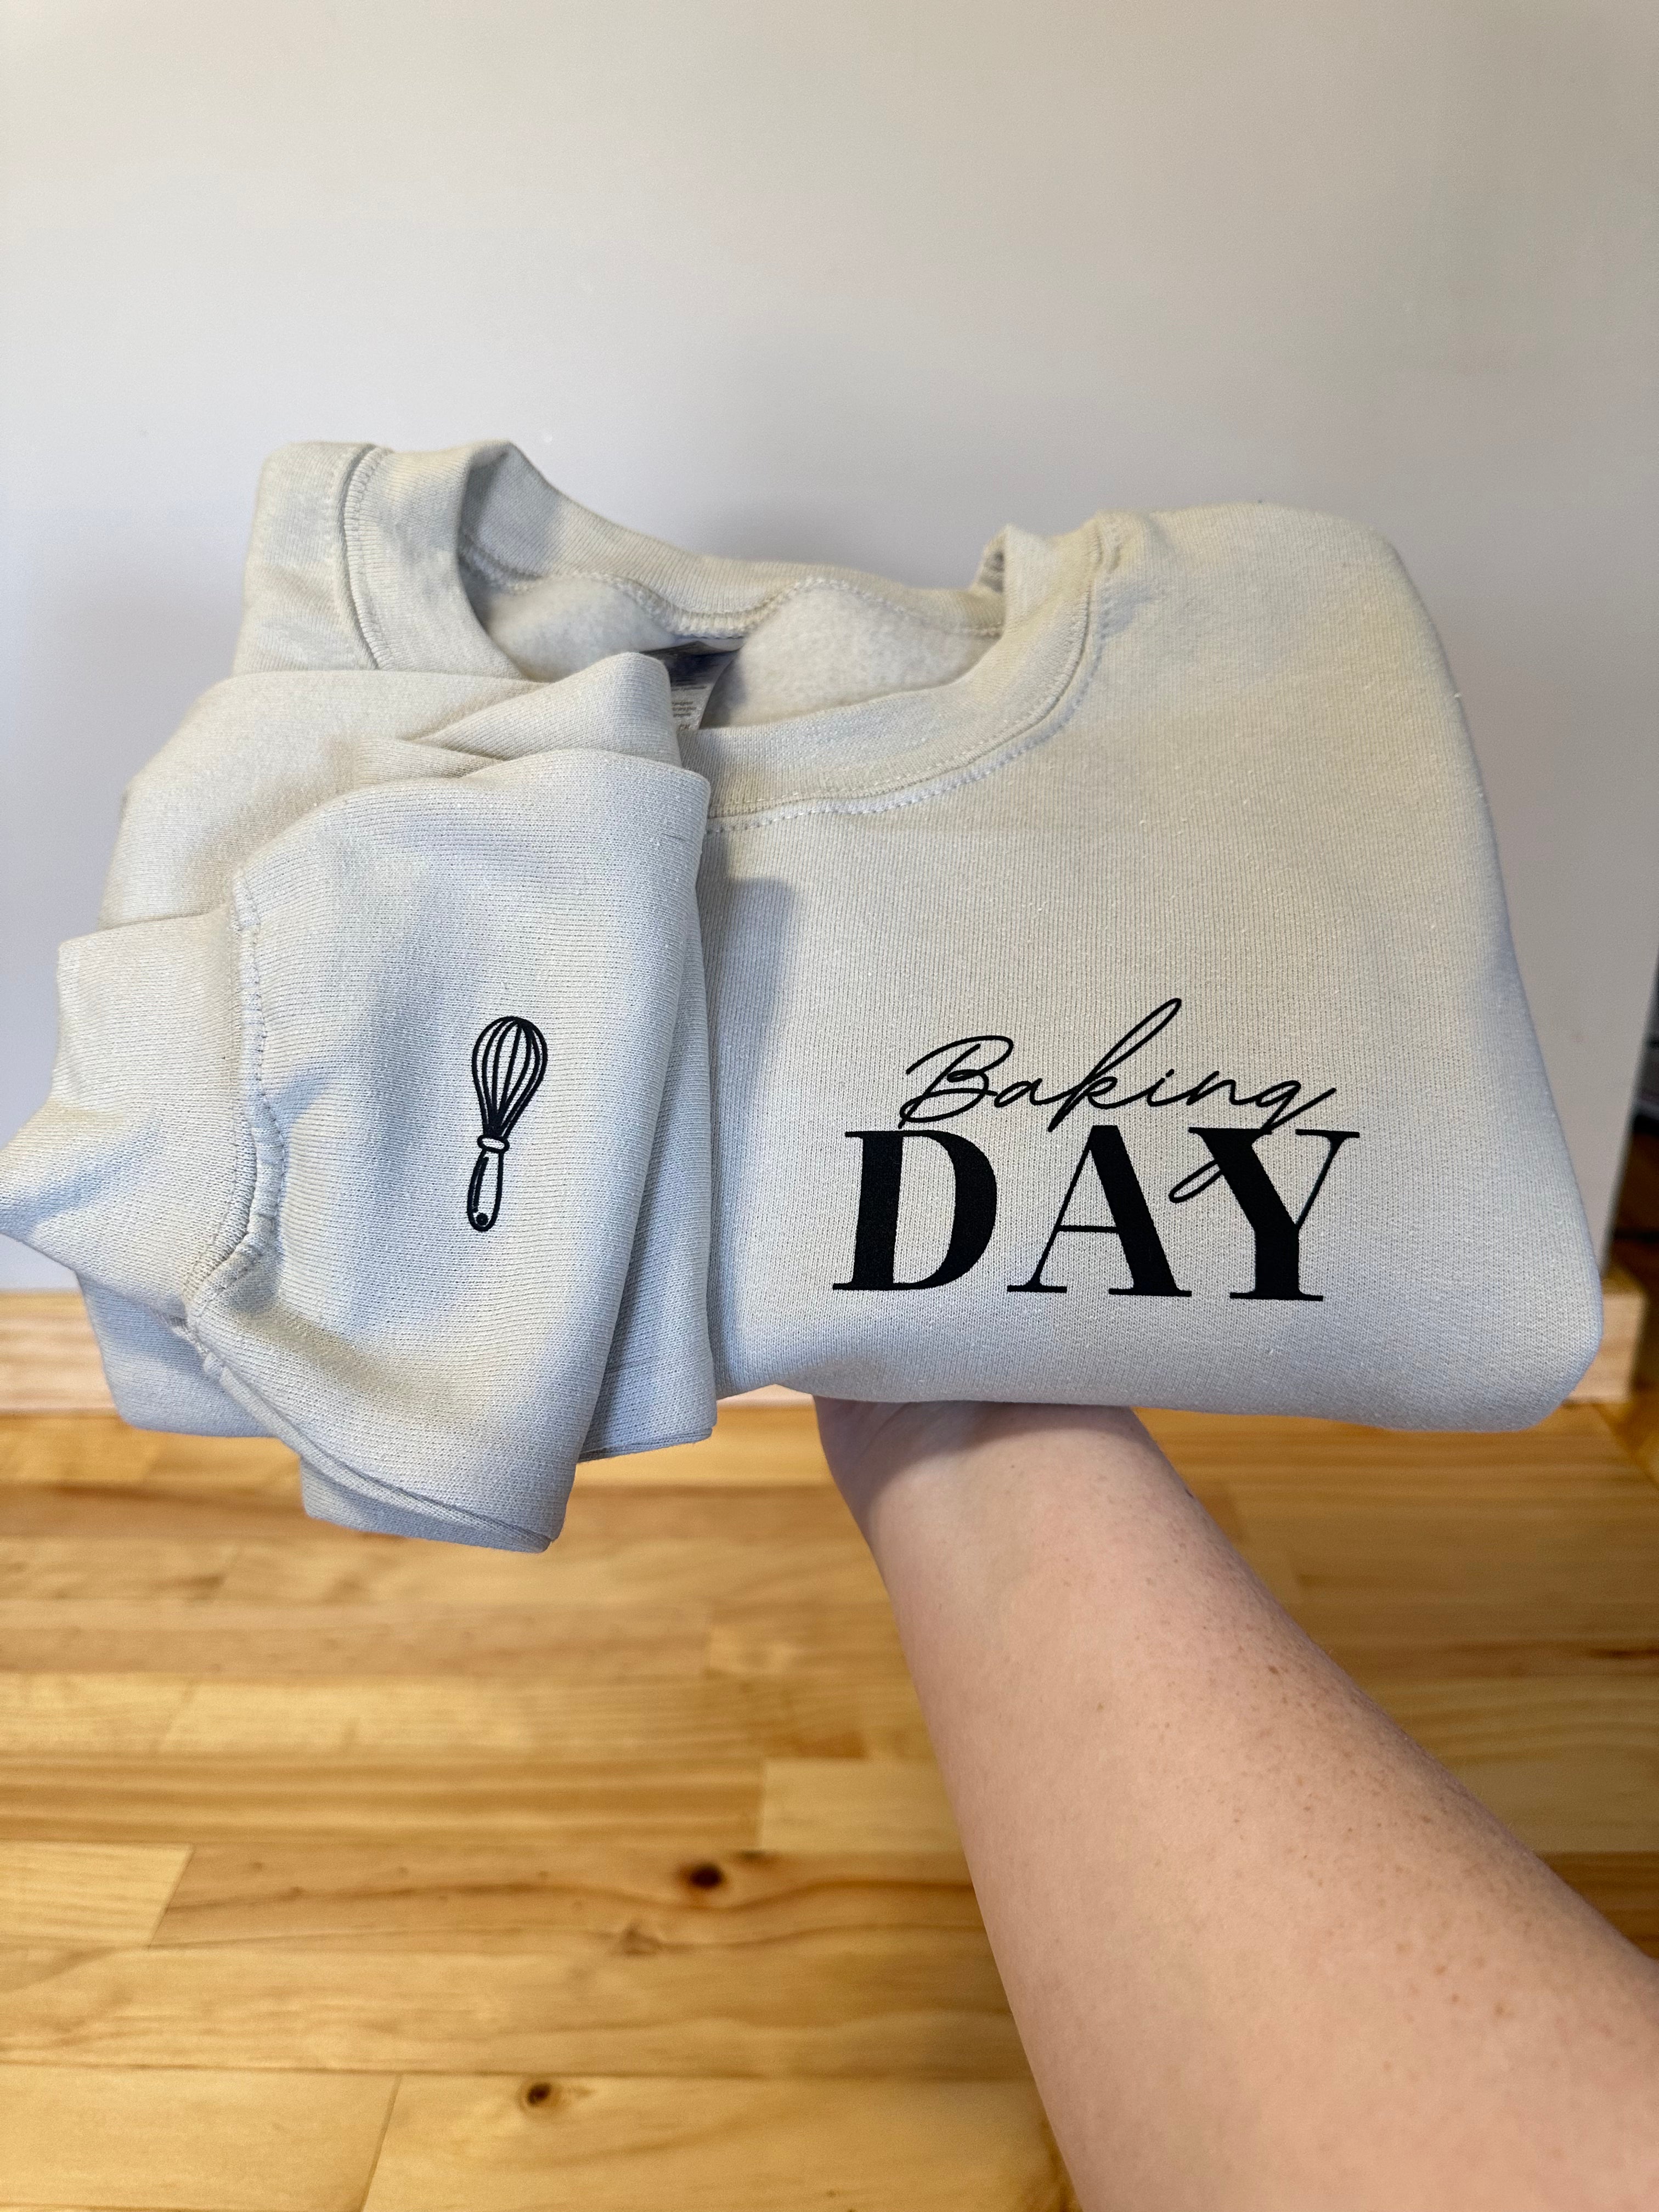 RESTOCK COMING SOON Baking Day crew neck (whisk wrist detail)